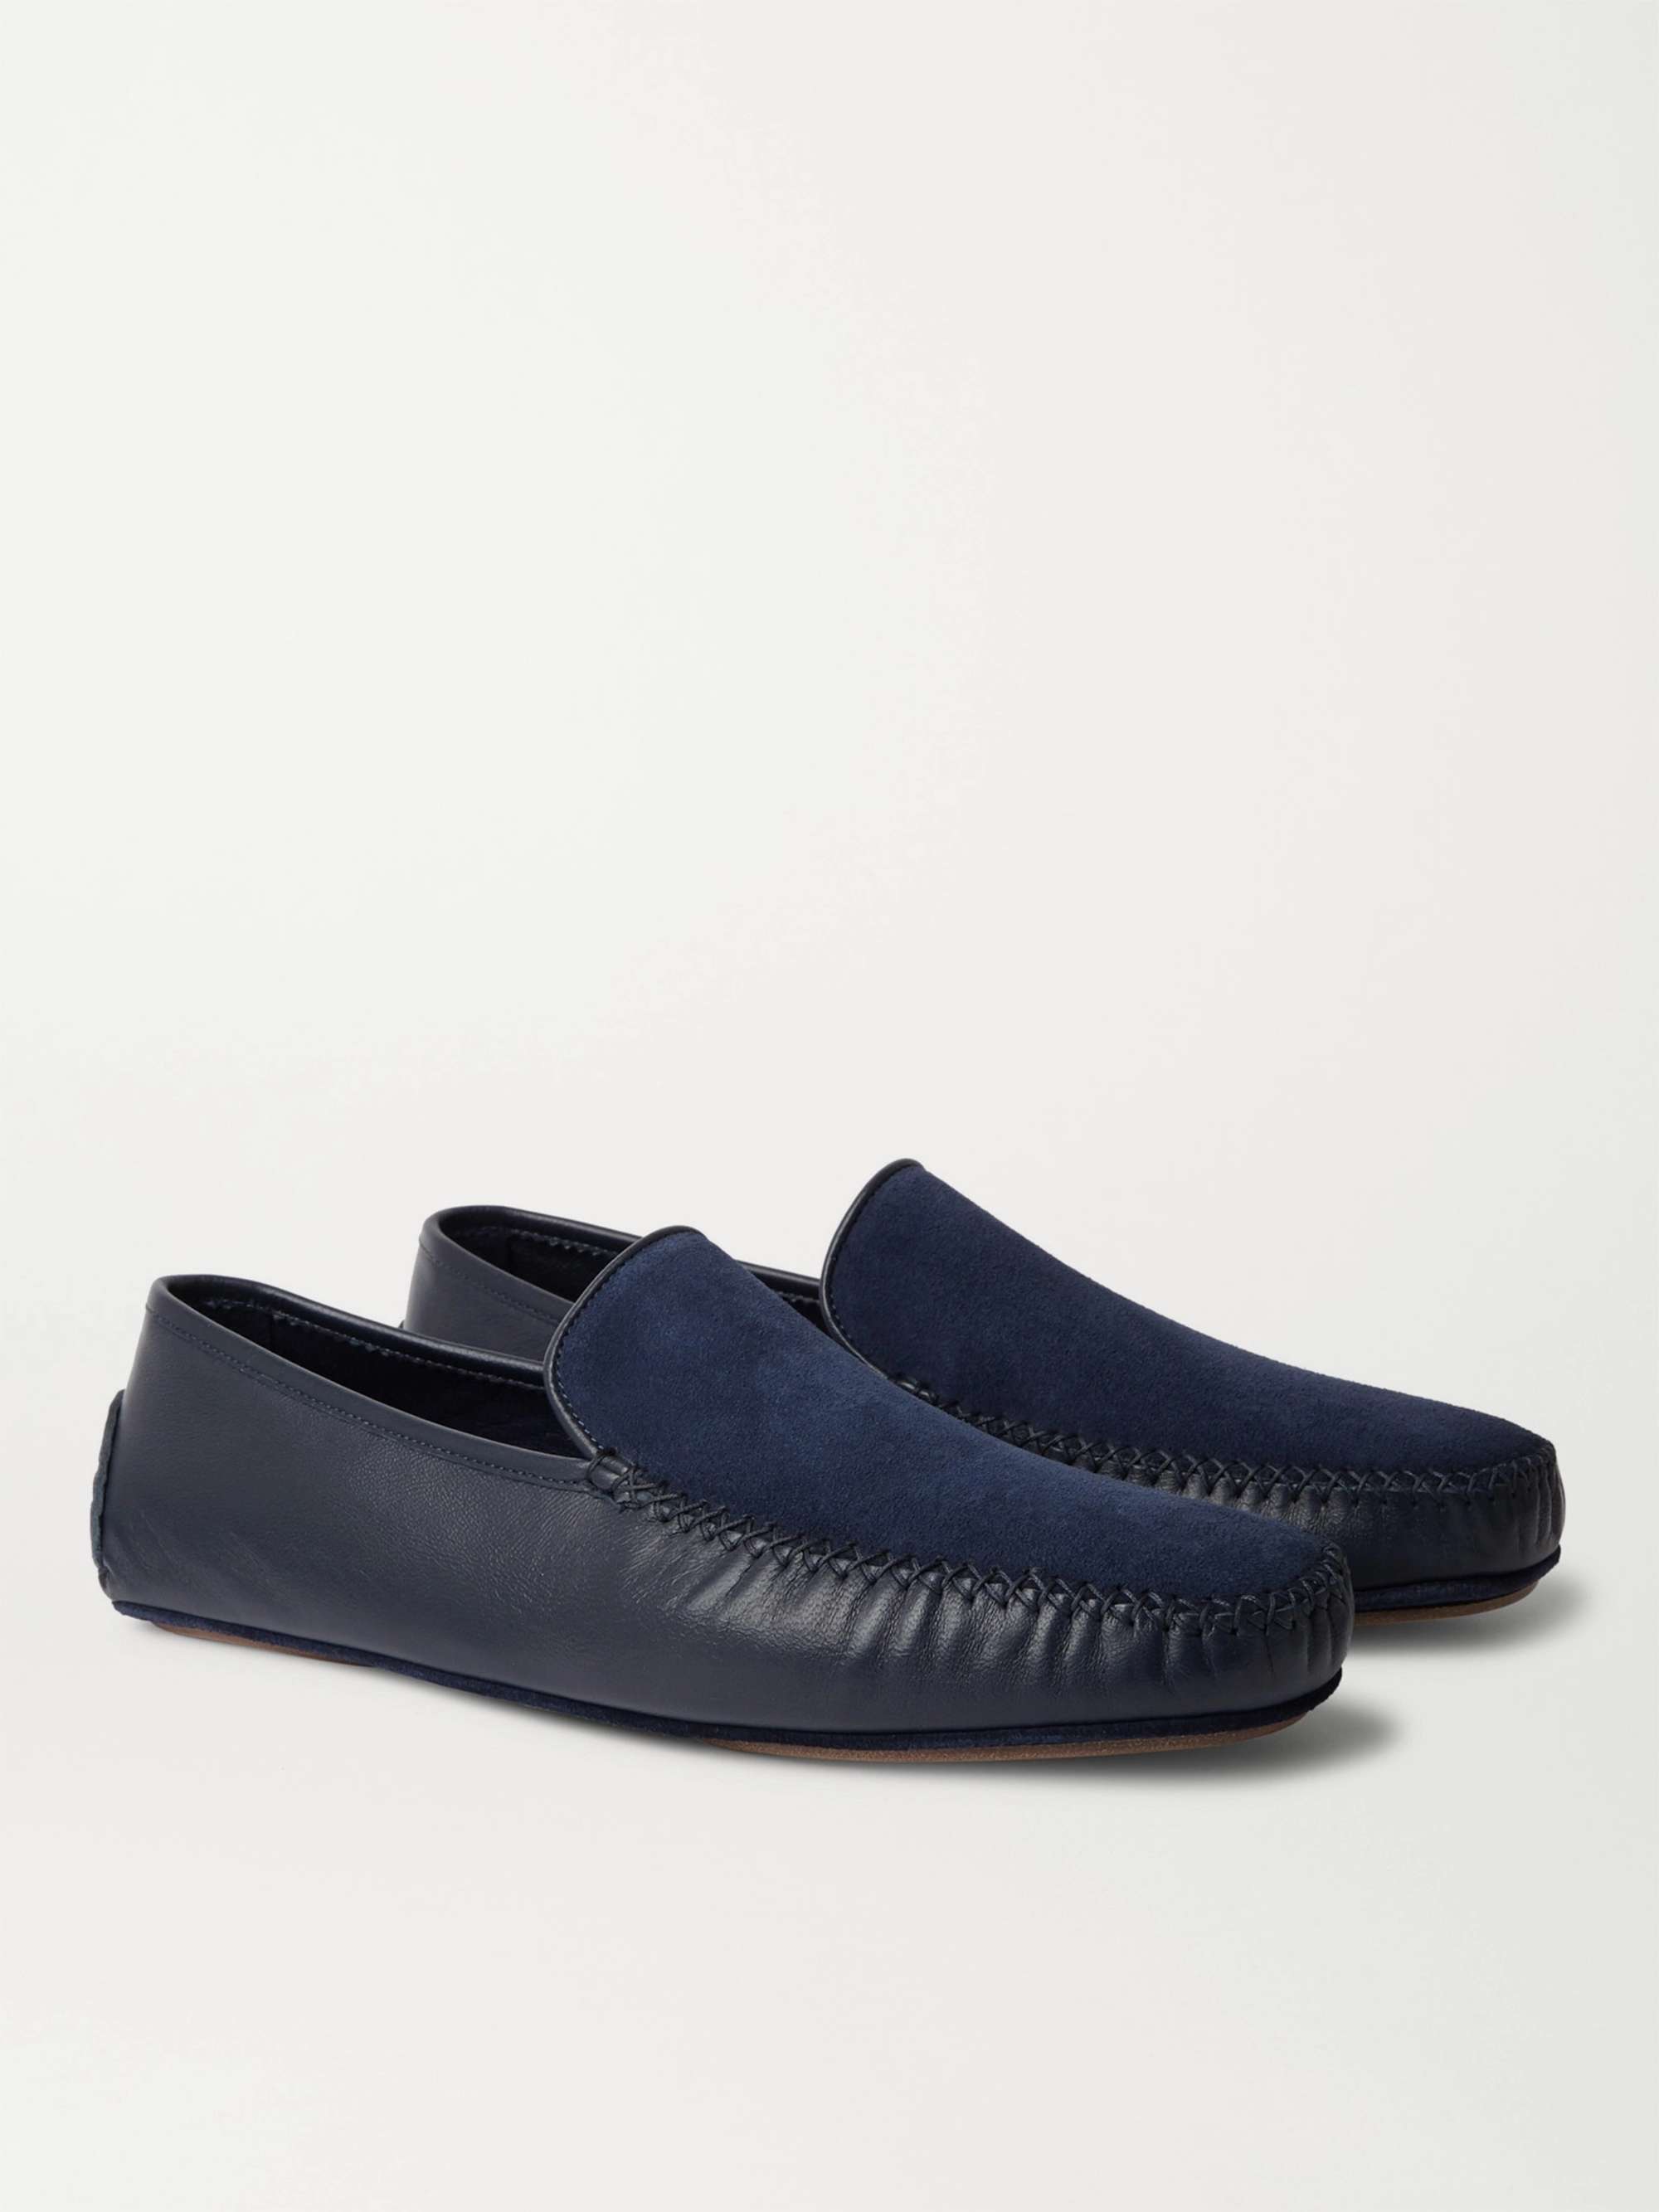 MANOLO BLAHNIK Mayfair Leather and Suede Slippers for Men | MR PORTER